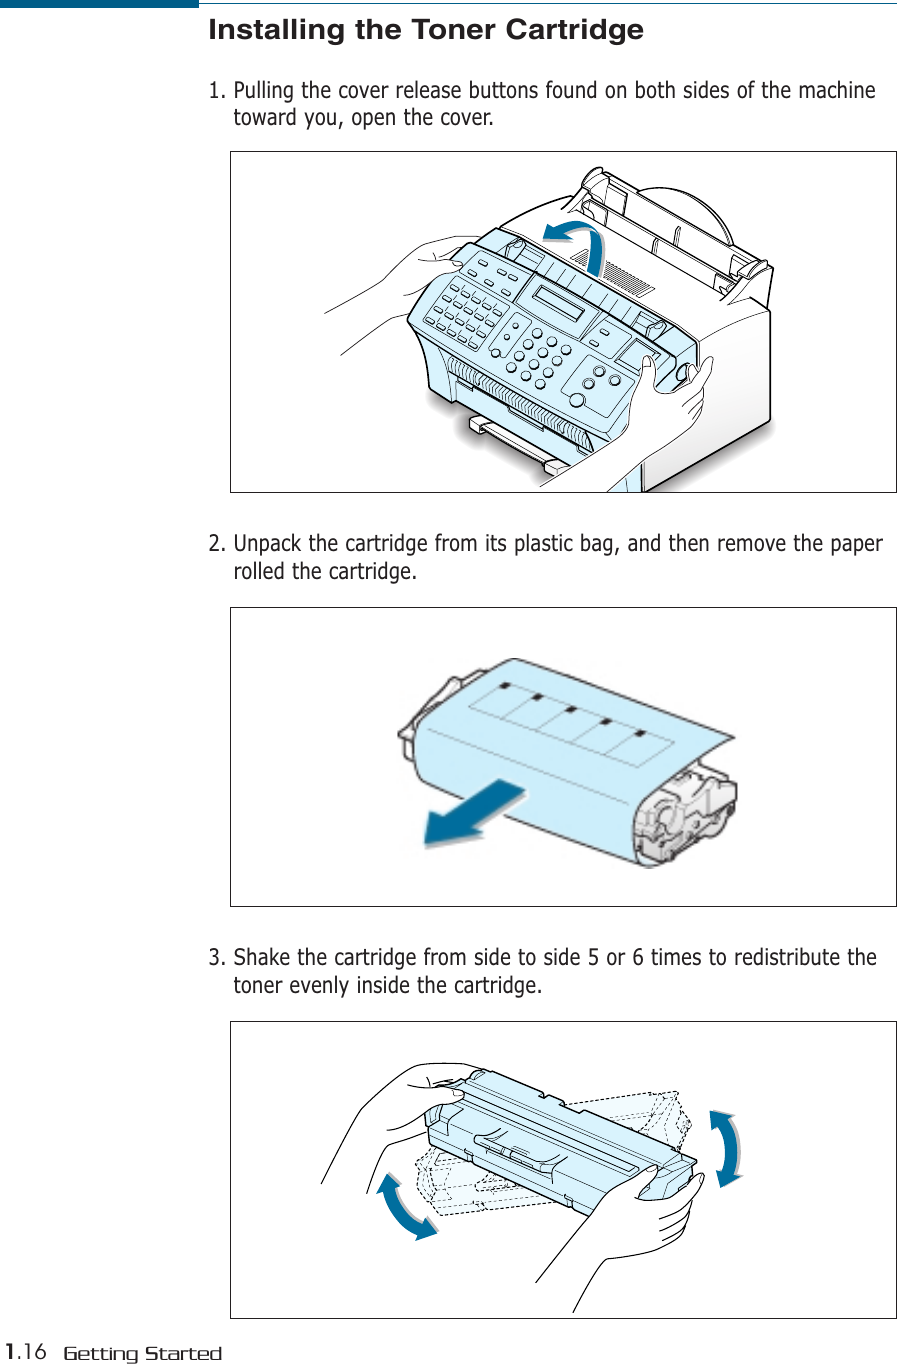 1.16 Getting StartedInstalling the Toner Cartridge1. Pulling the cover release buttons found on both sides of the machinetoward you, open the cover.2. Unpack the cartridge from its plastic bag, and then remove the paperrolled the cartridge. 3. Shake the cartridge from side to side 5 or 6 times to redistribute thetoner evenly inside the cartridge.